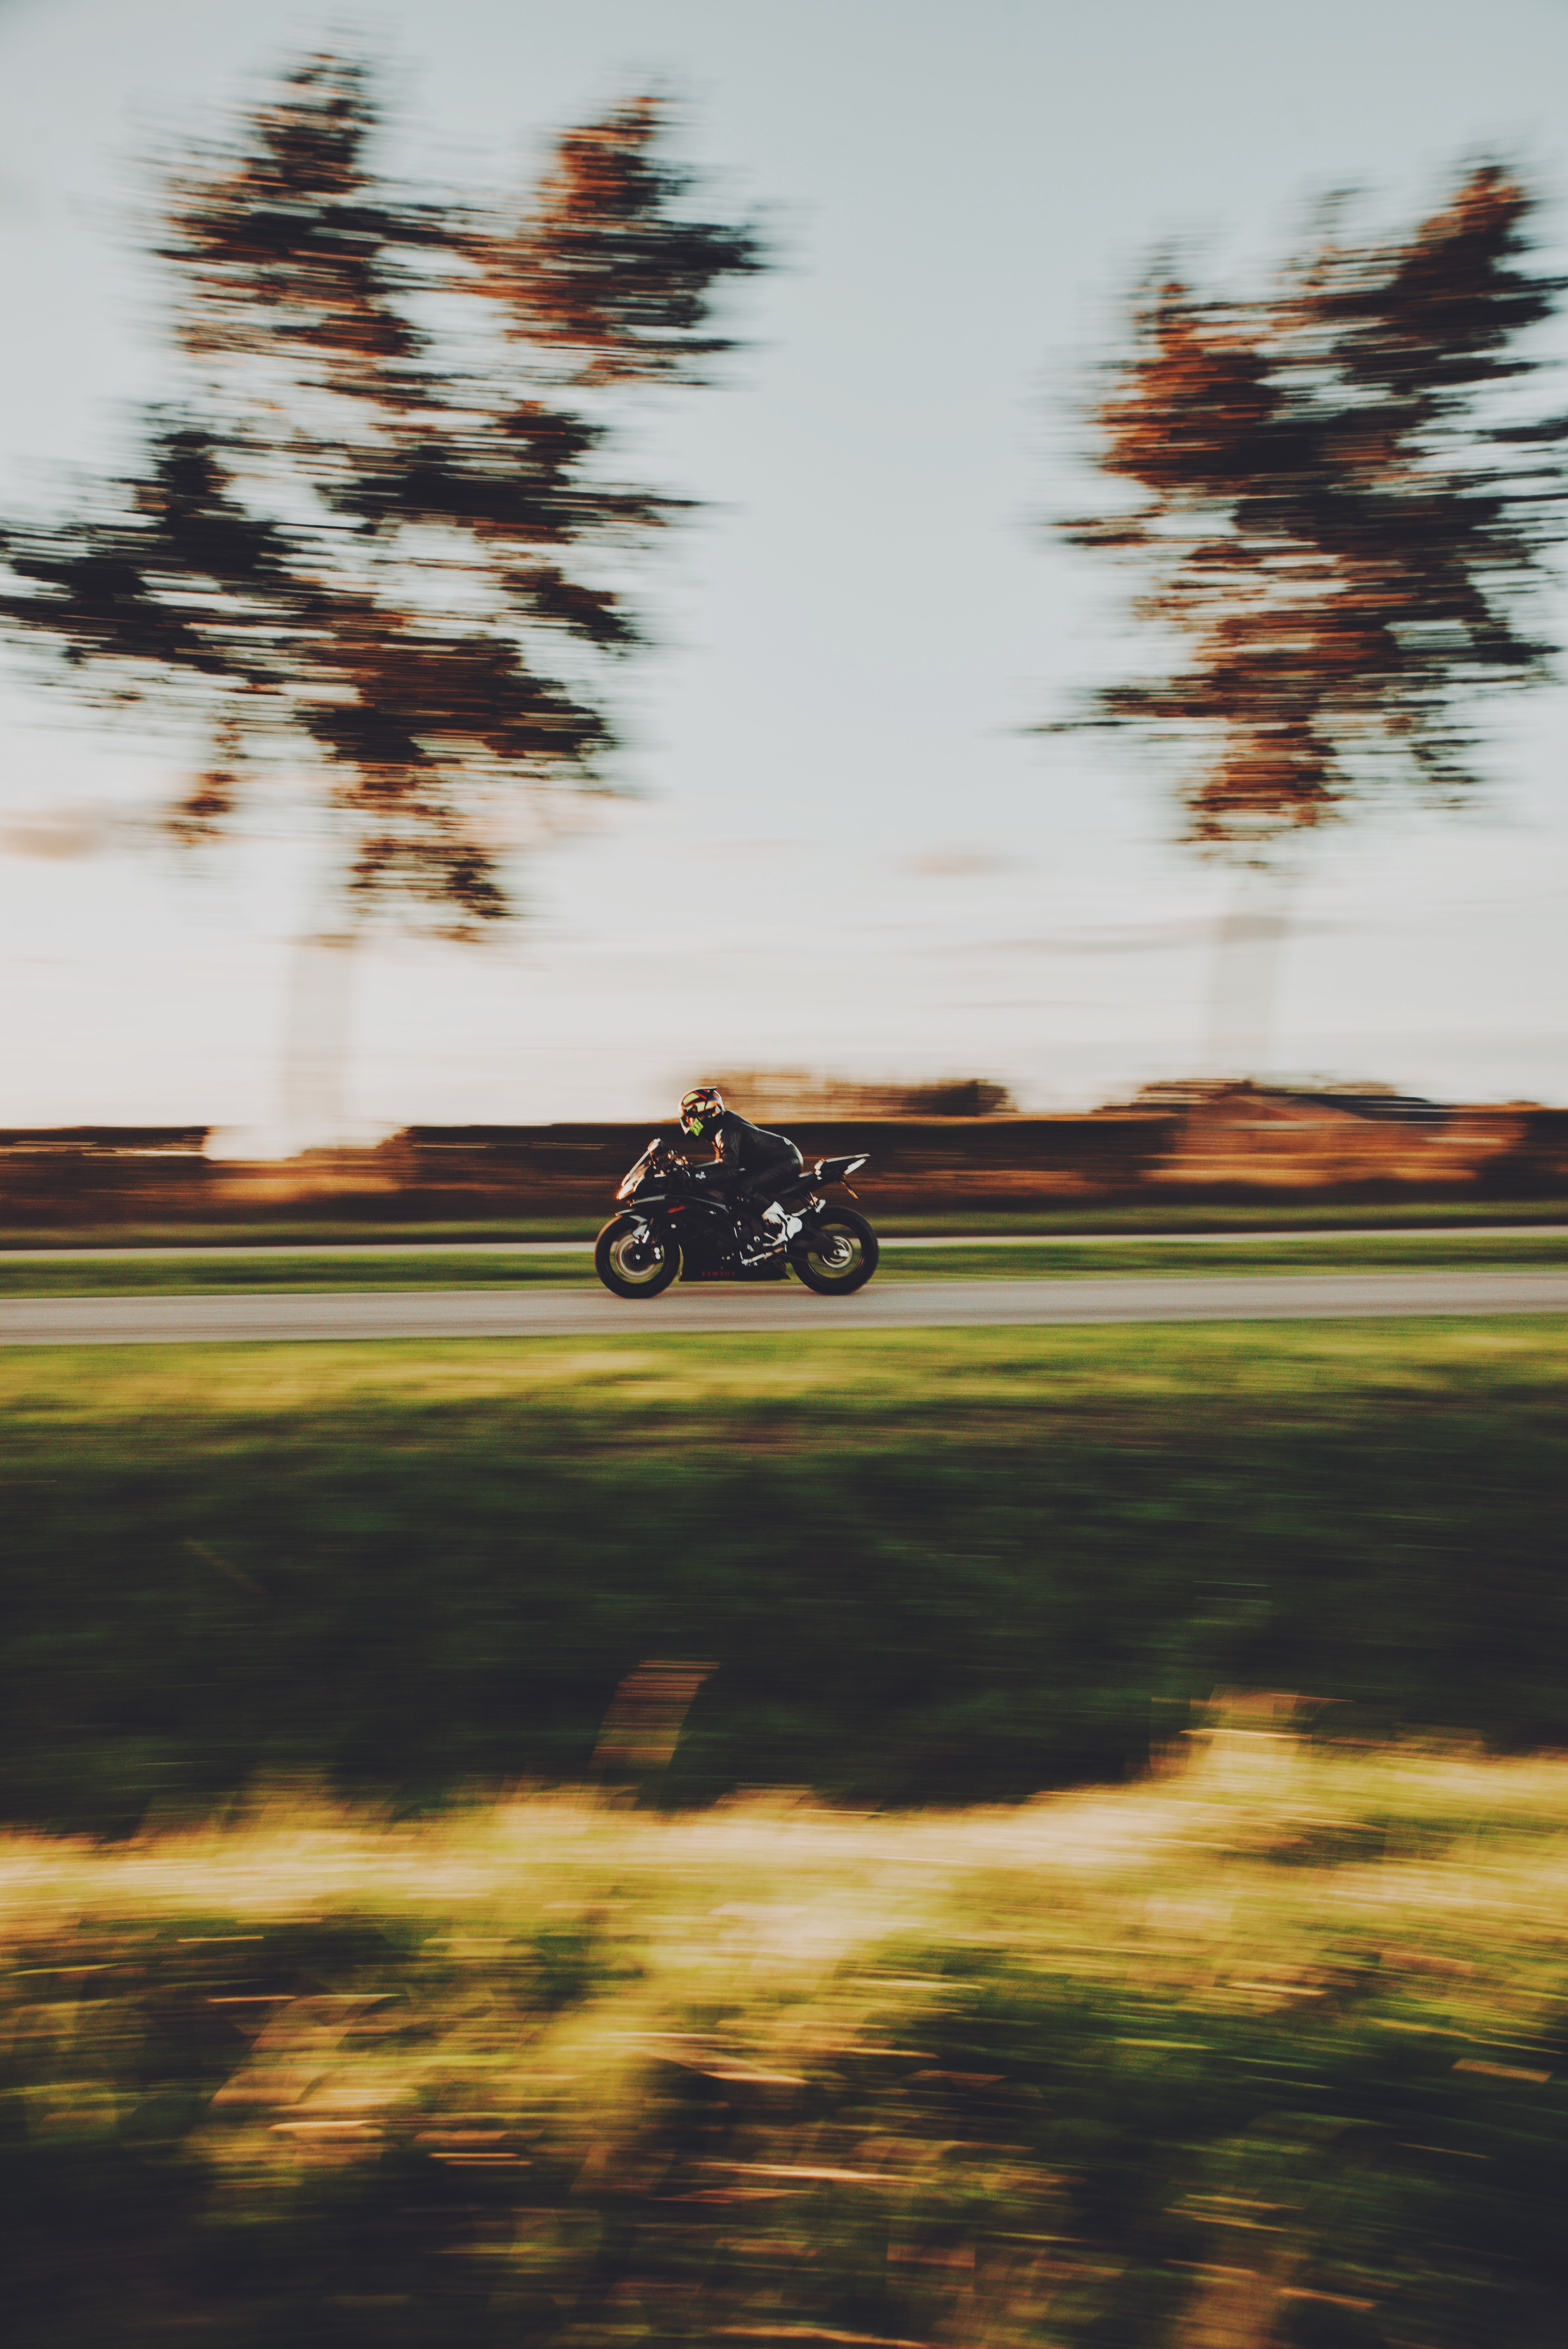  Motorcyclist HQ Background Wallpapers